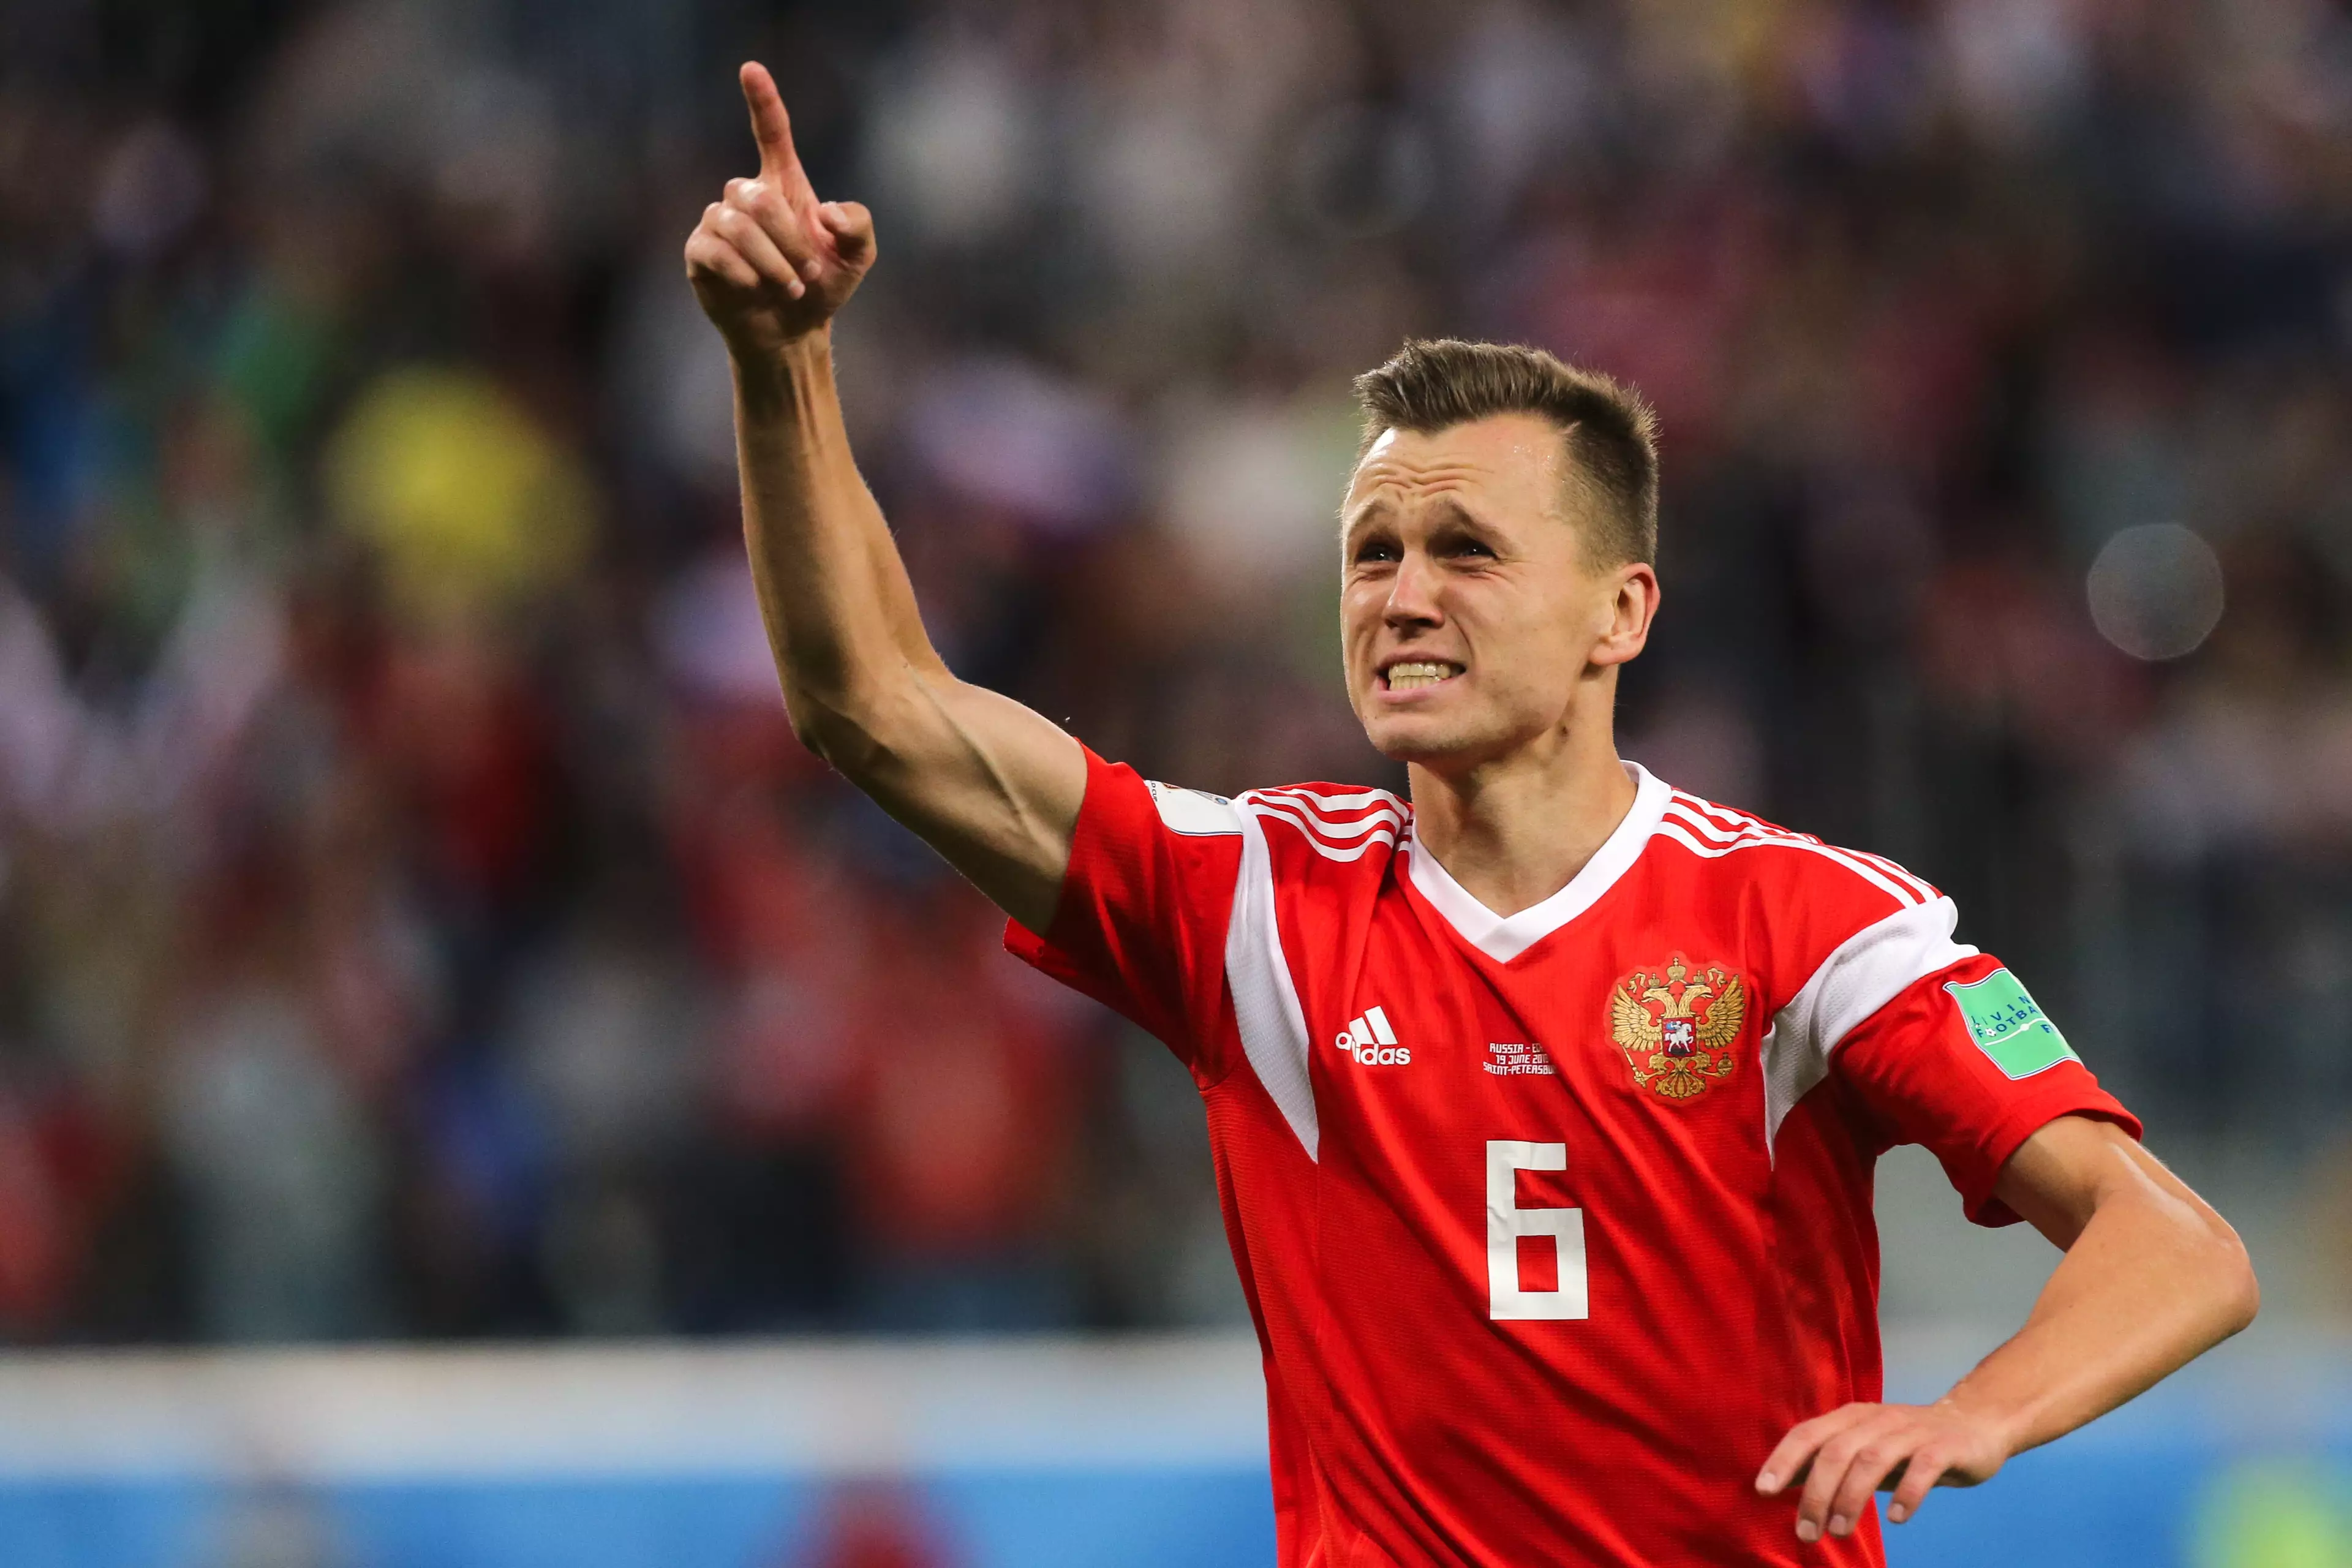 Cheryshev has scored three goals in the World Cup so far. Image: PA Images